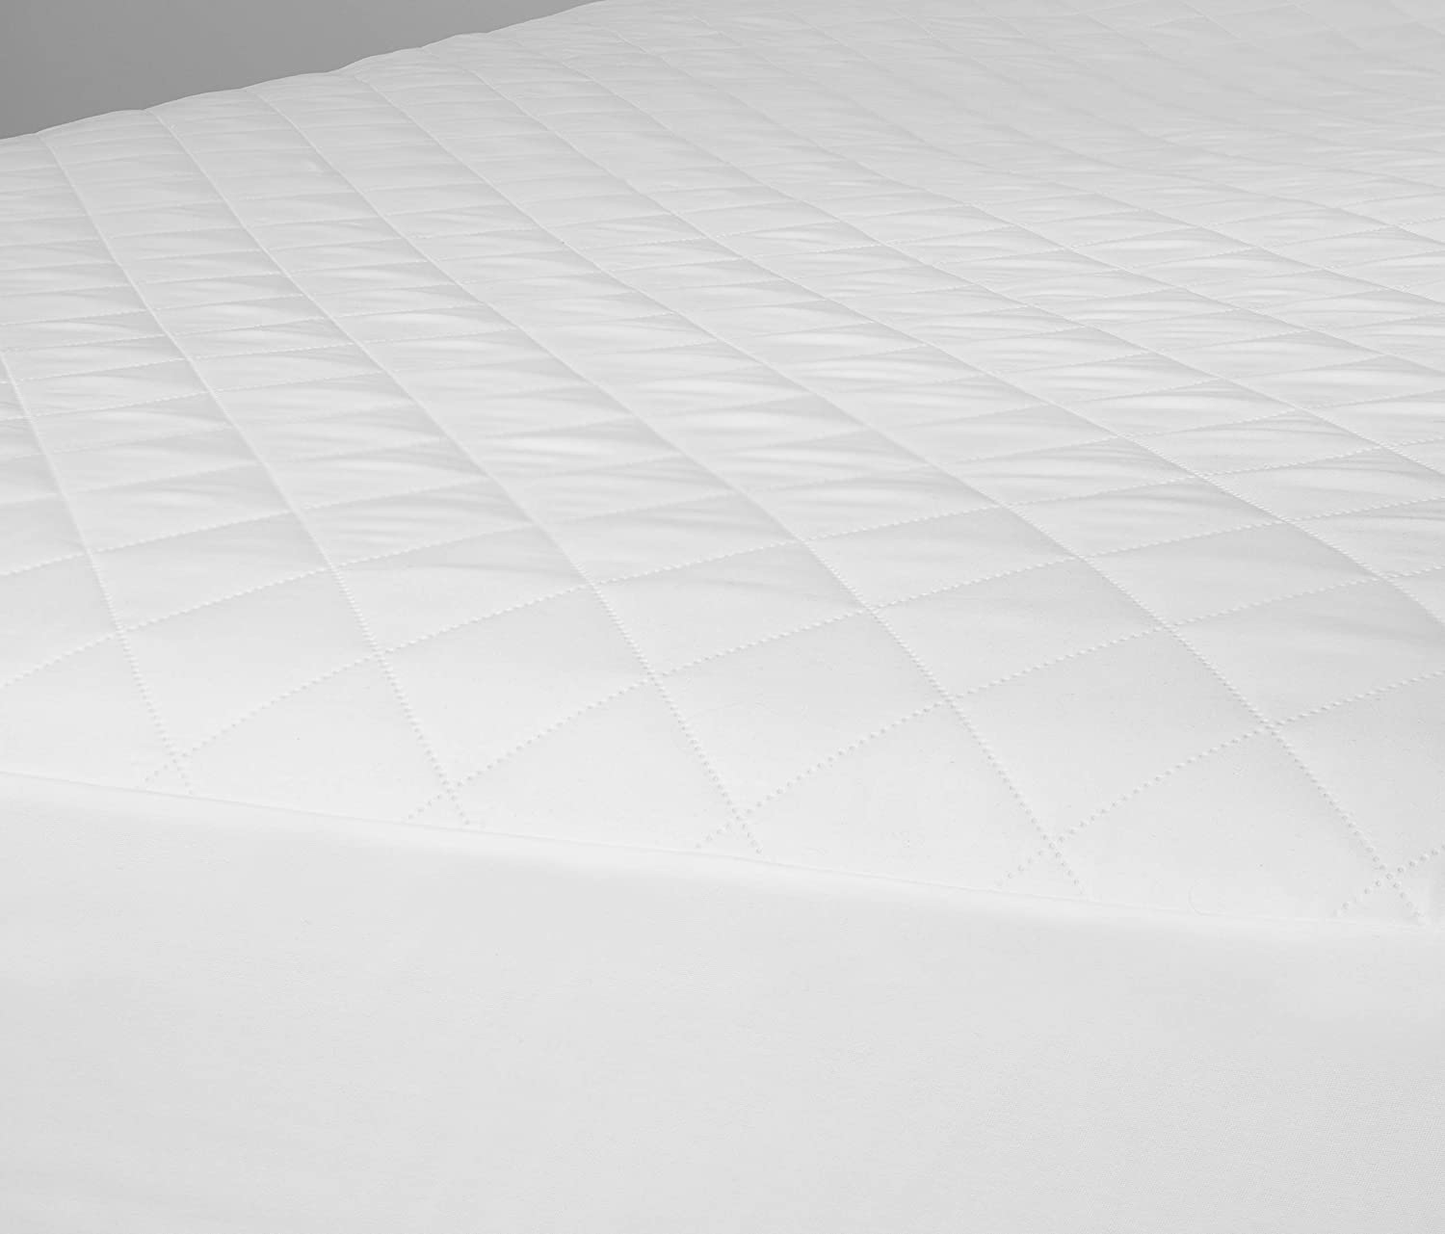 Quilted Mattress Pad - The Quilted Fabric is Comfortable and Thick Enough to Get a Restful Night Sleep. The Plush Mattress Topper Will Also Help Protect Your Mattress from Stains. (Twin)